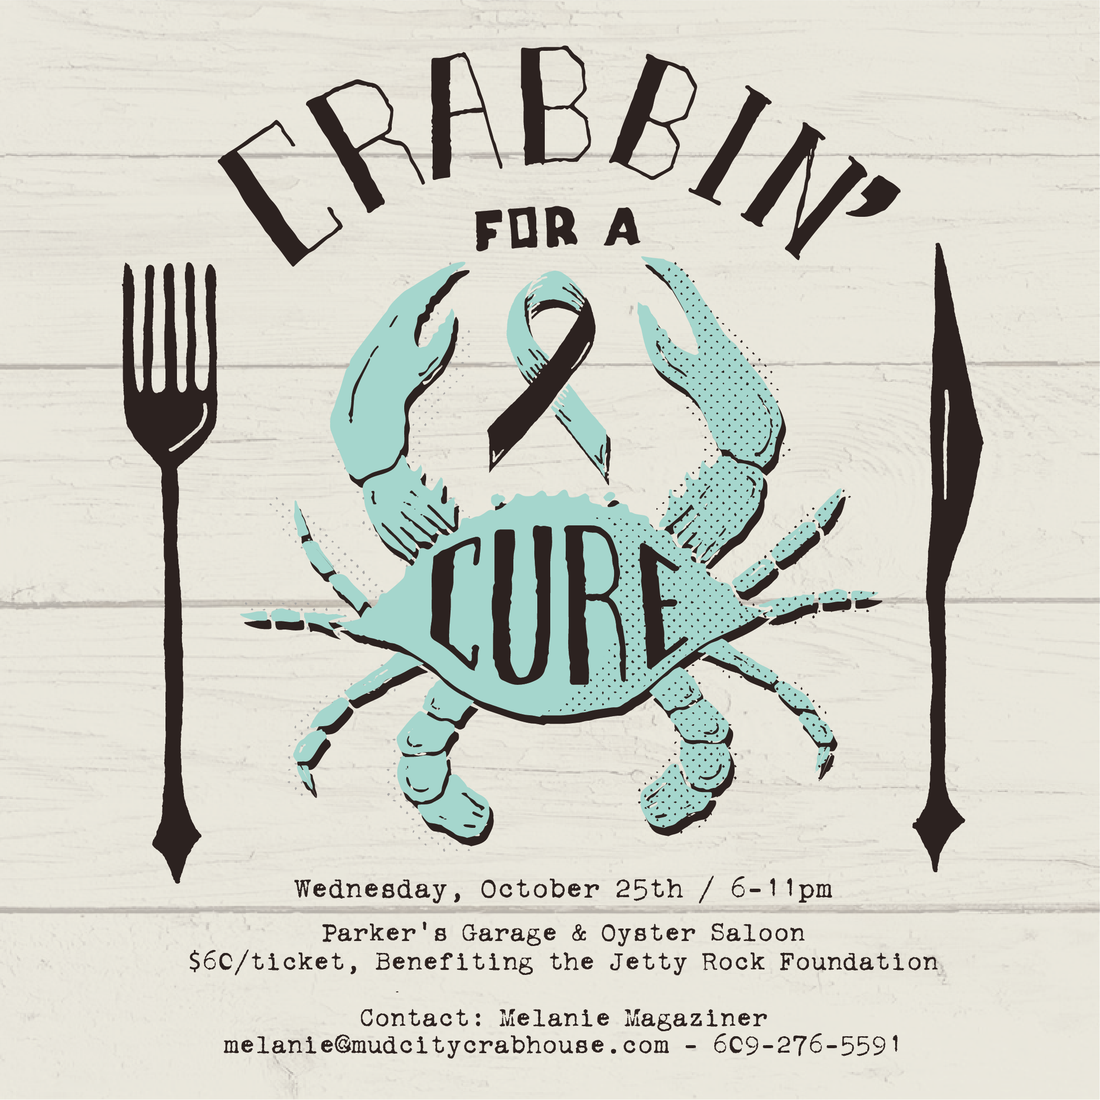 Crabbin' for a Cure